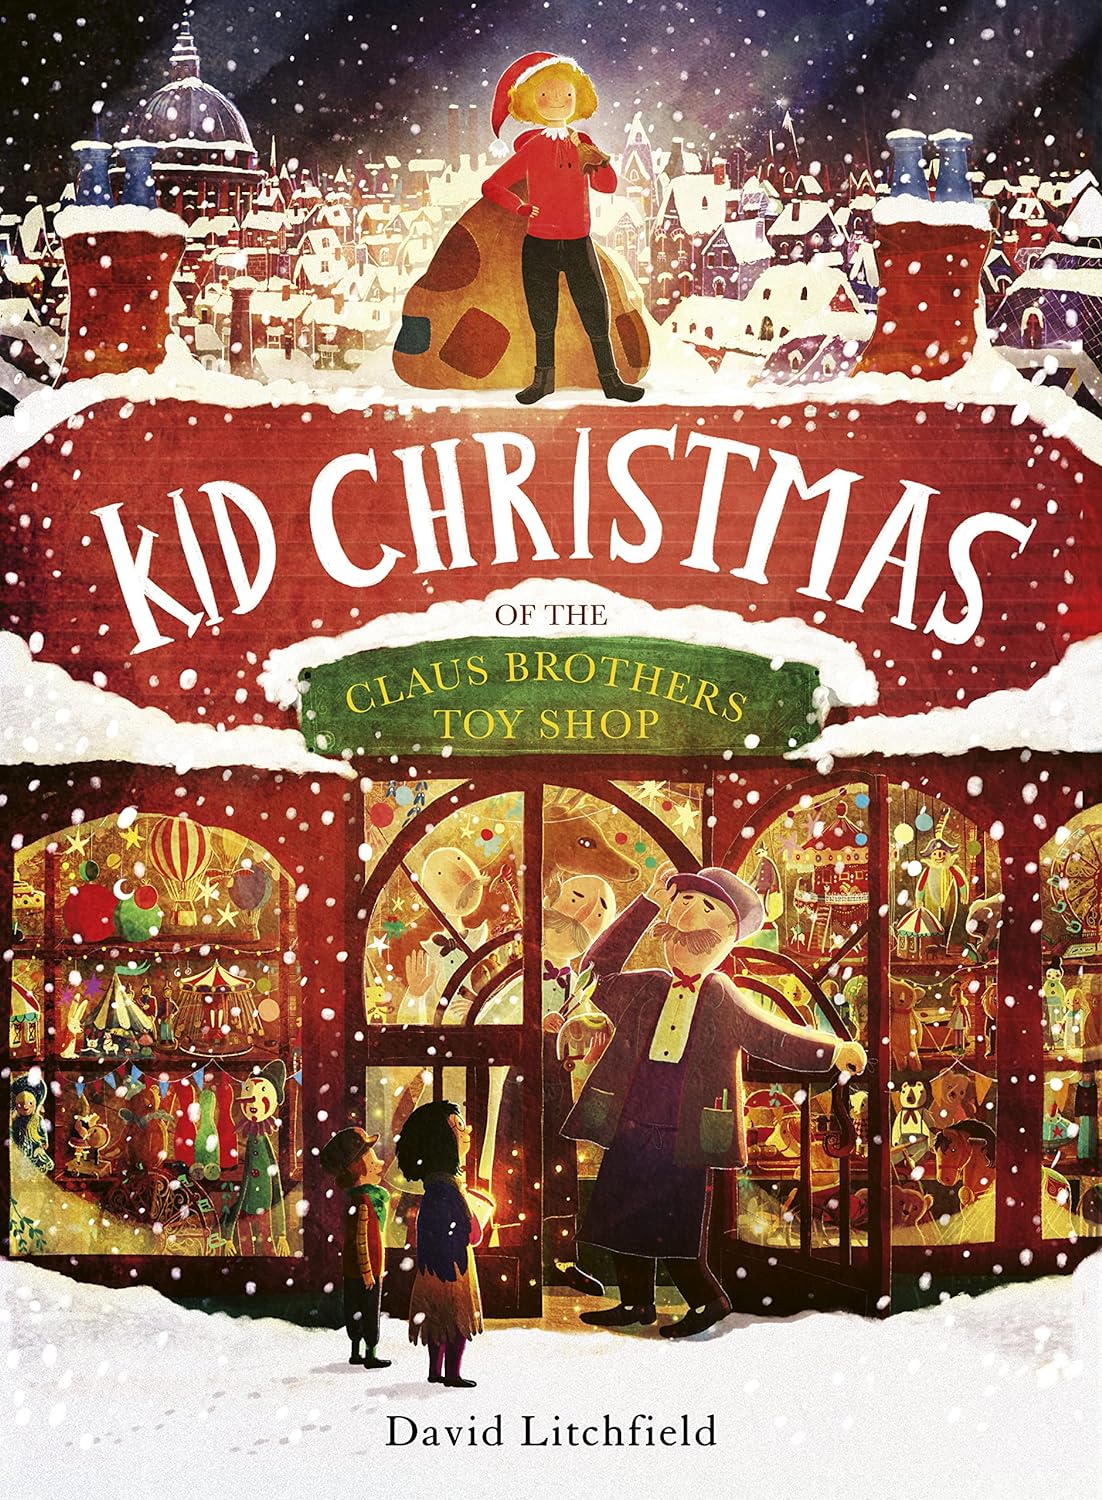 Kid Christmas: Of The Claus Brothers Toy Shop